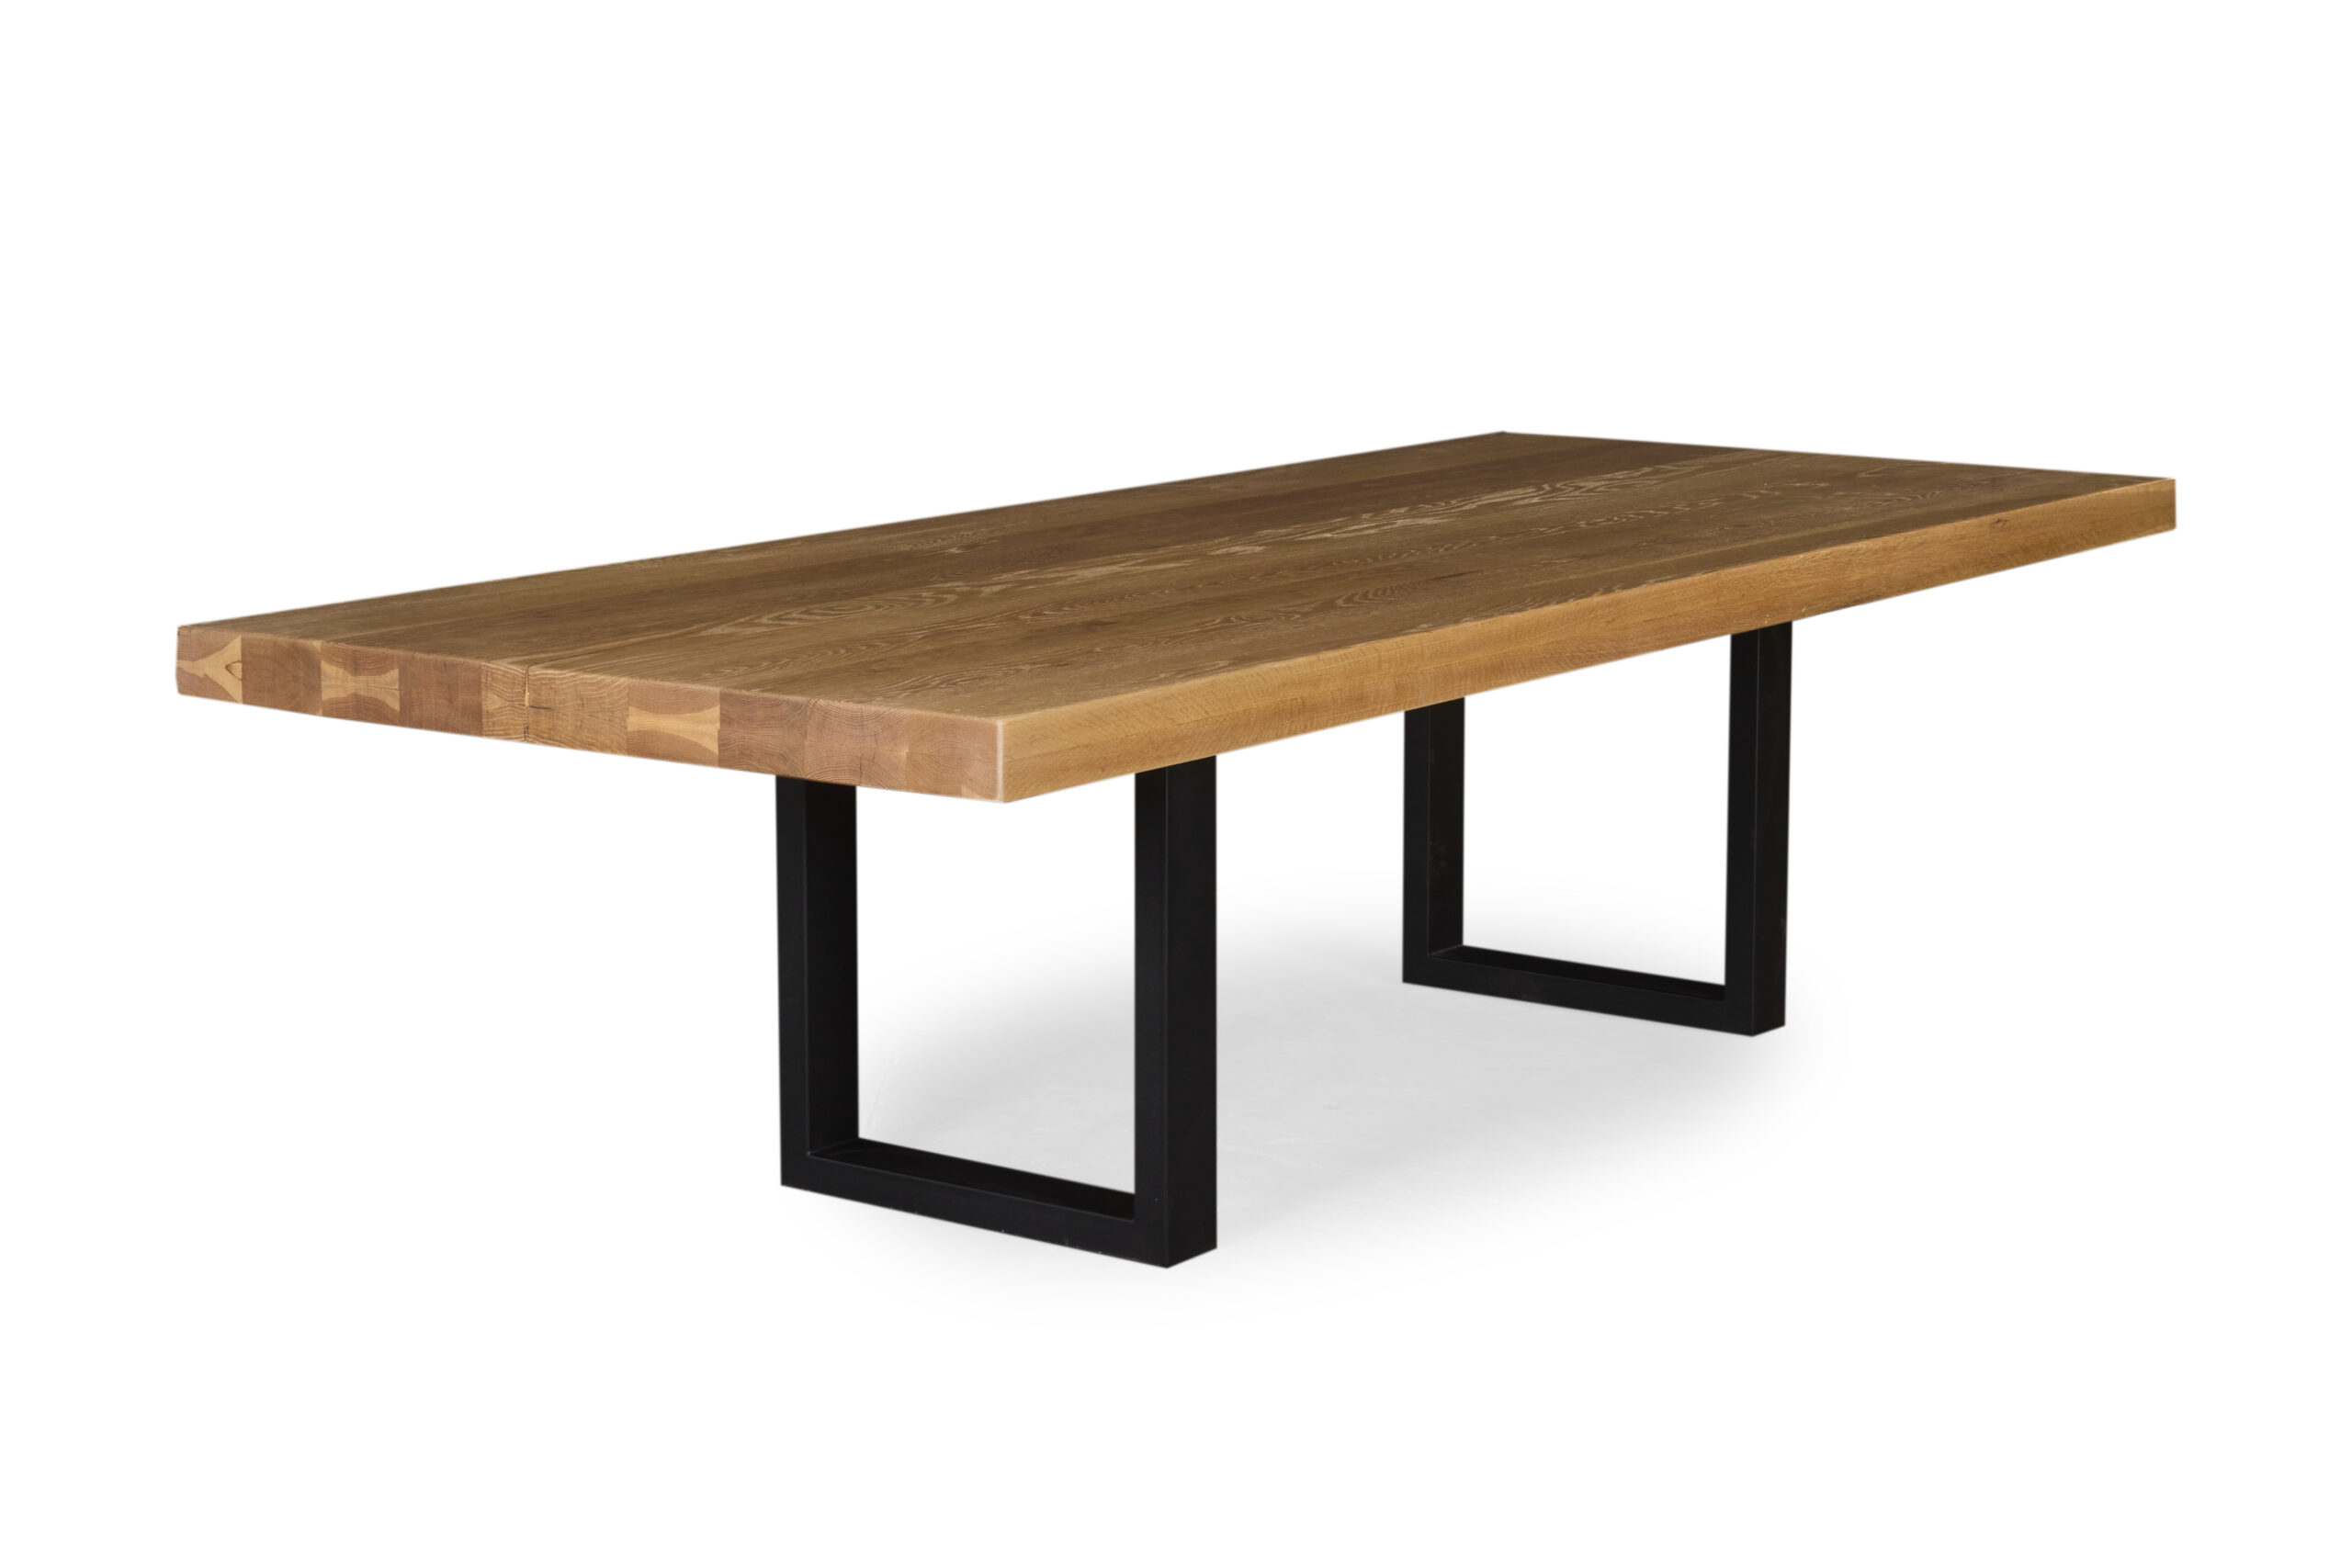 Richmond Dining Table - American Oak, U-leg timber base, white oil finish - In-stock for immediate delivery.